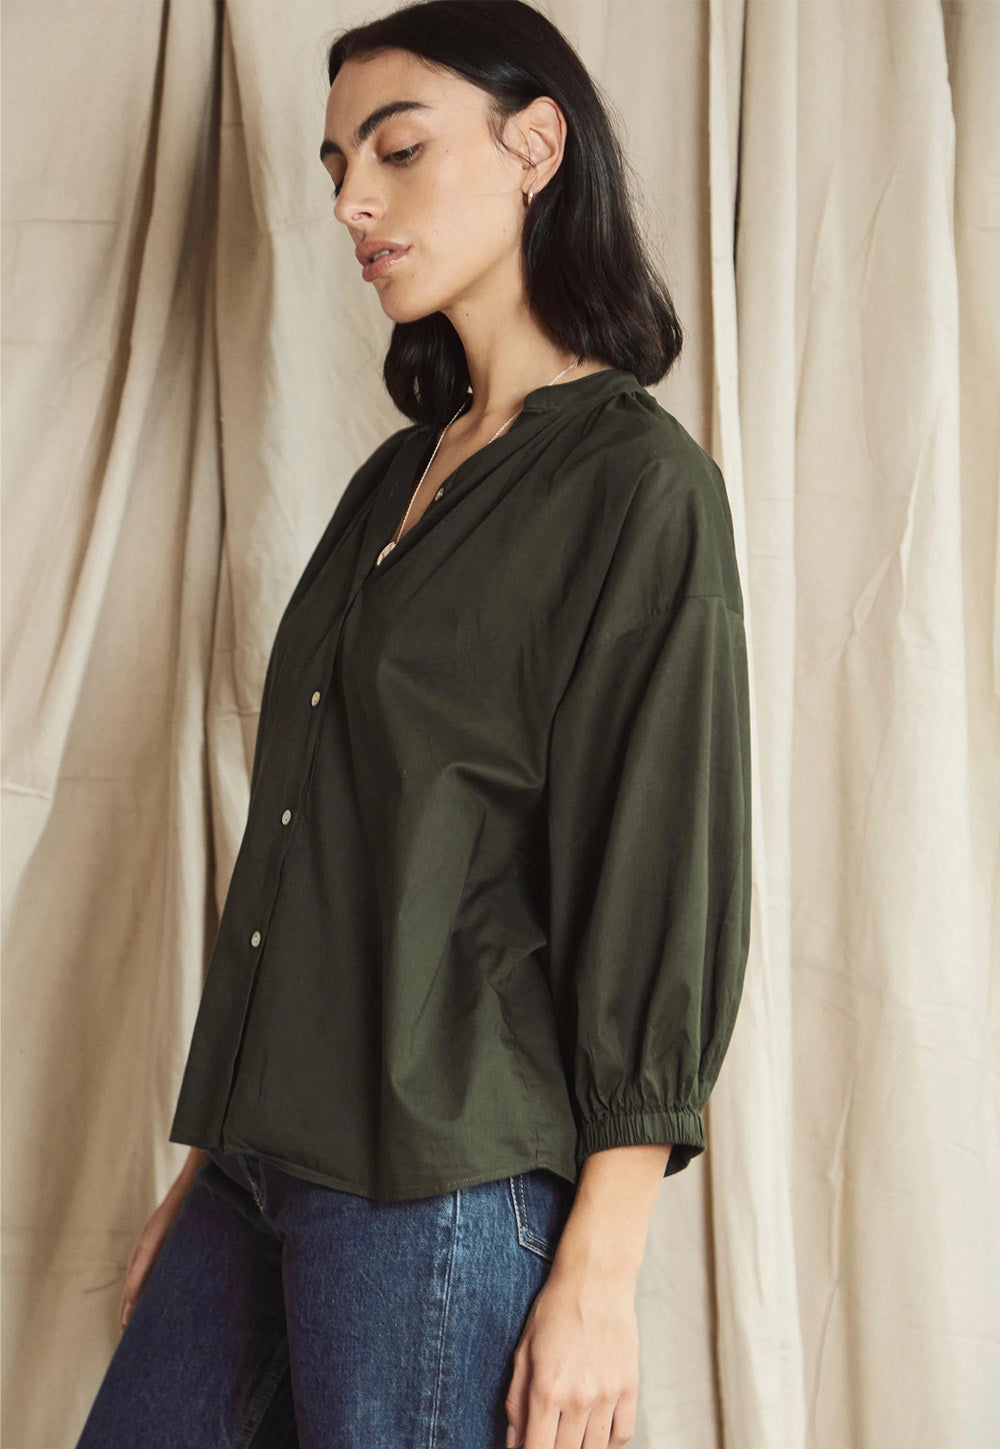 Everyday Blouse - Jungle Cotton Voile sold by Angel Divine